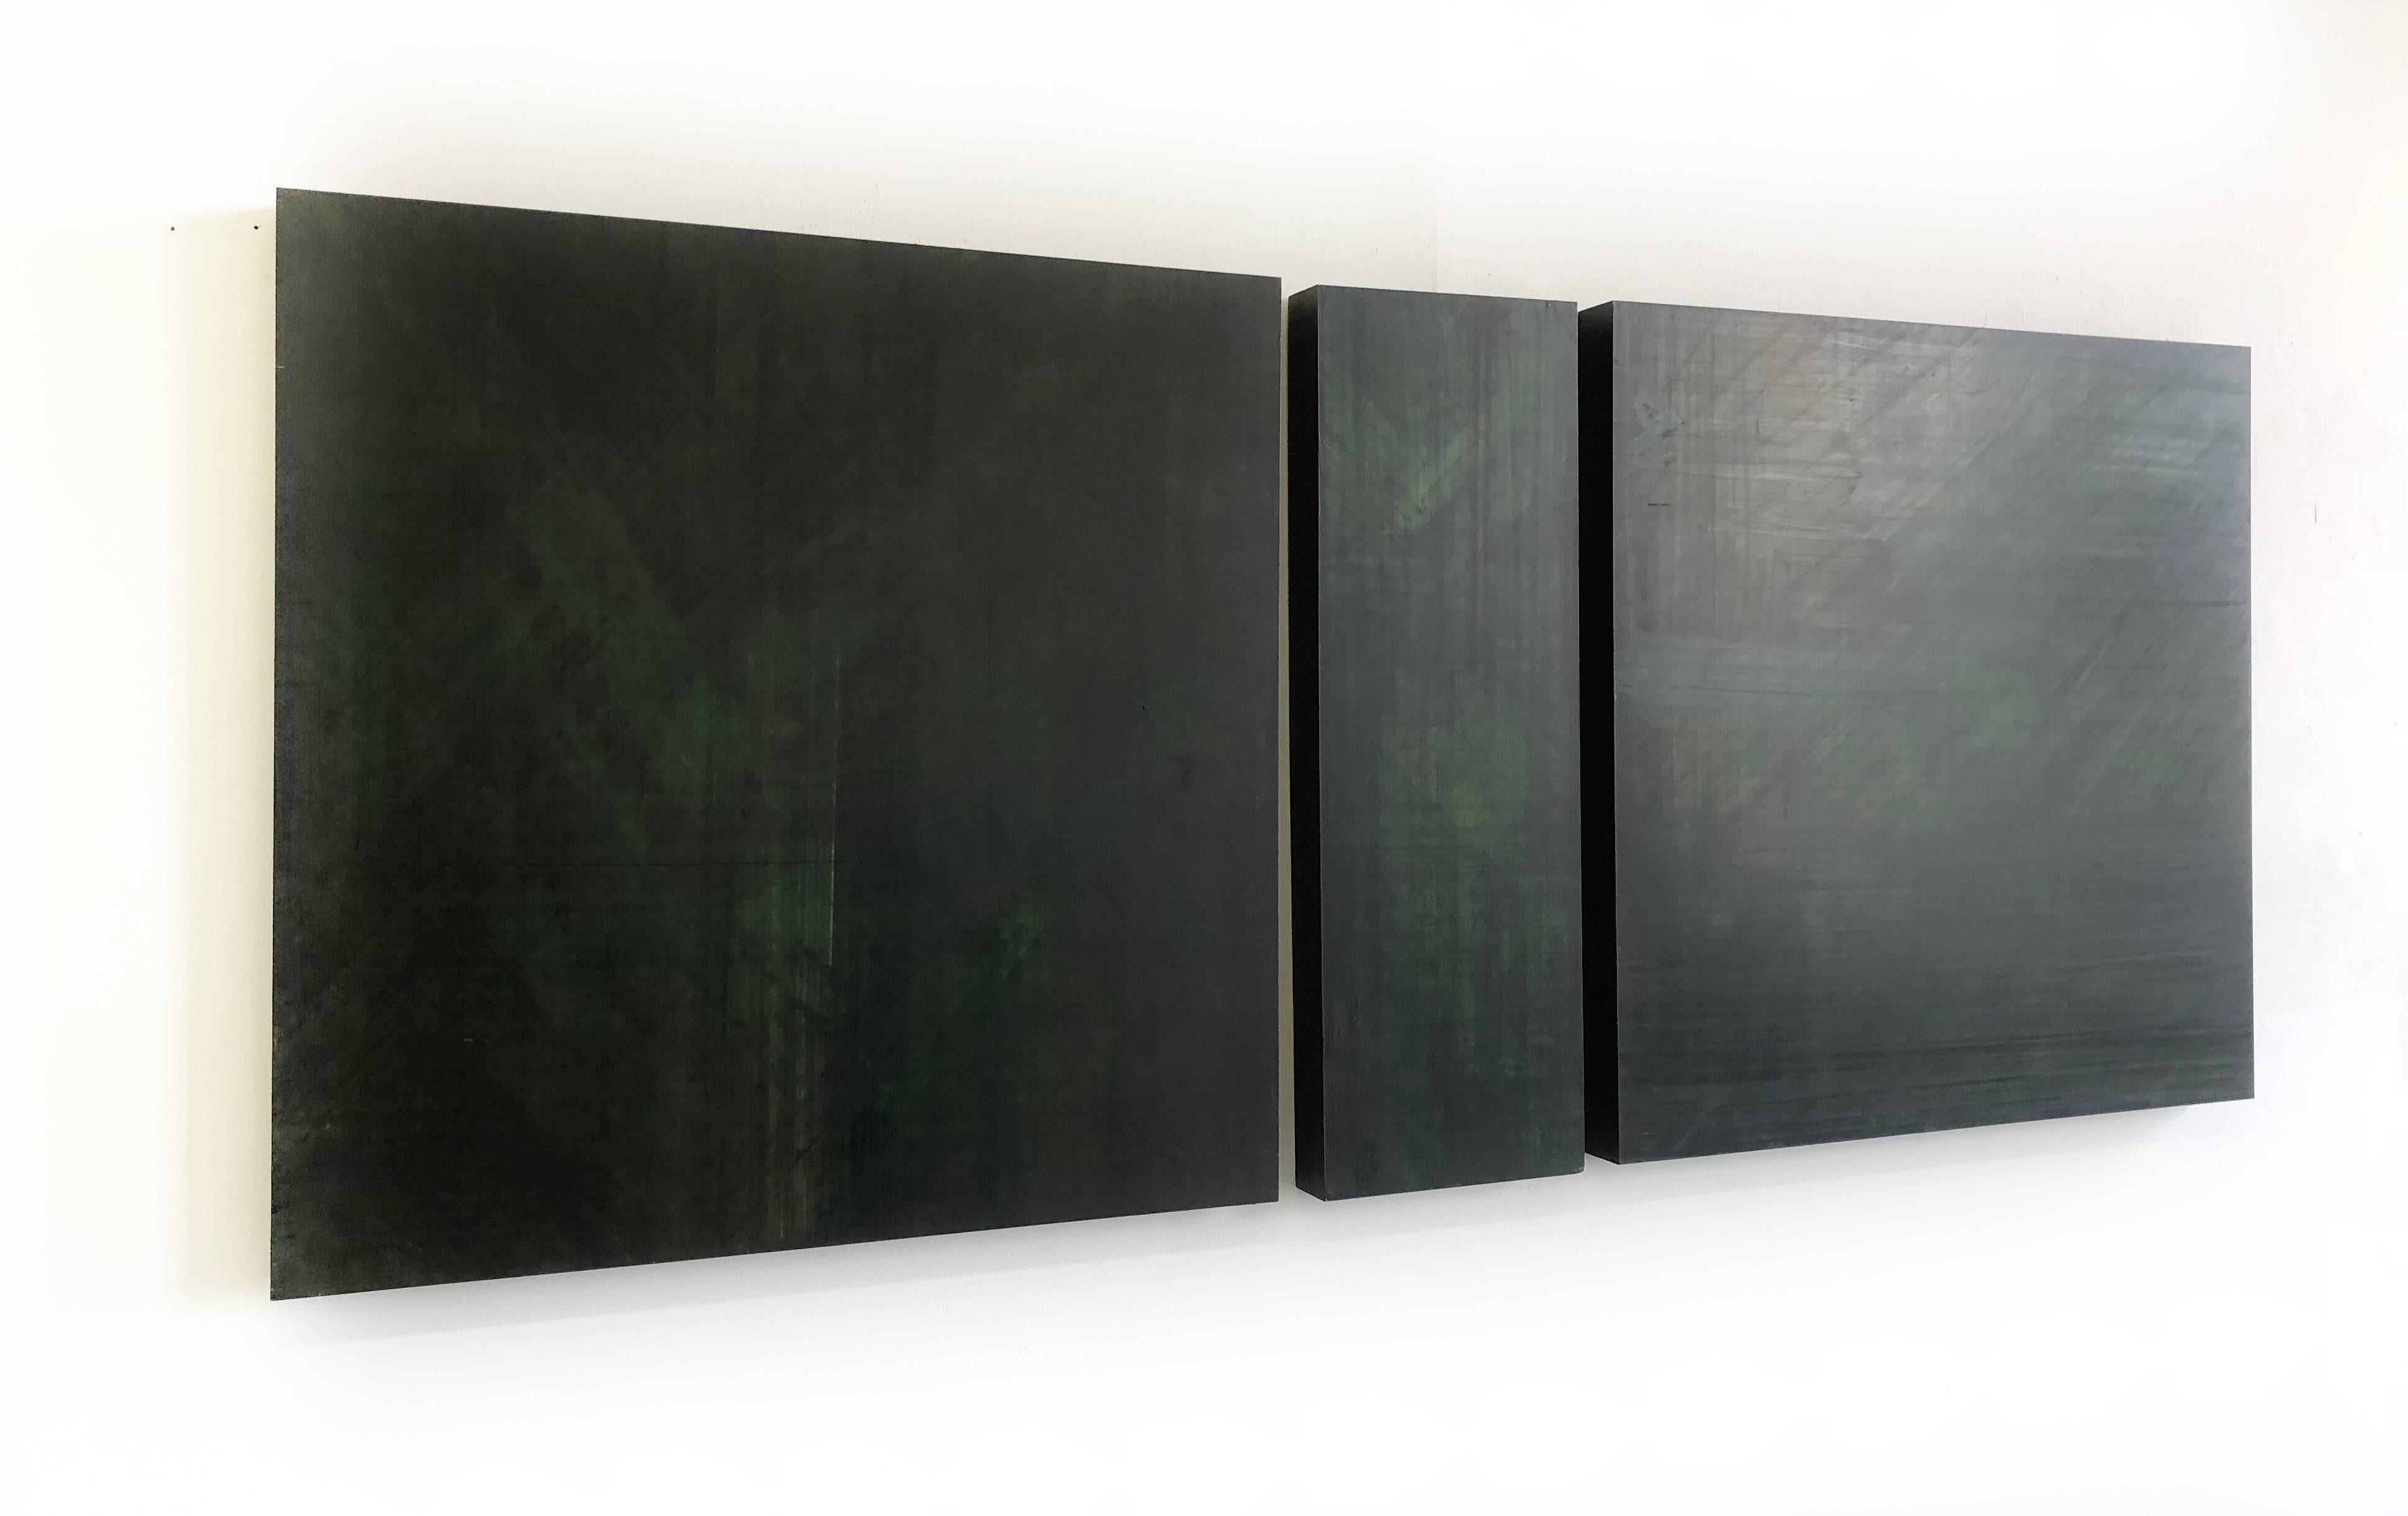 Acrylic on 3 wood panels
Overall dimensions:  30 x 72 x 2 inches
Suggested installation is 1-2 inches between each panel
and panels can be oriented in any direction


We are amazed by this artist's ability to achieve multiple flawless layers of